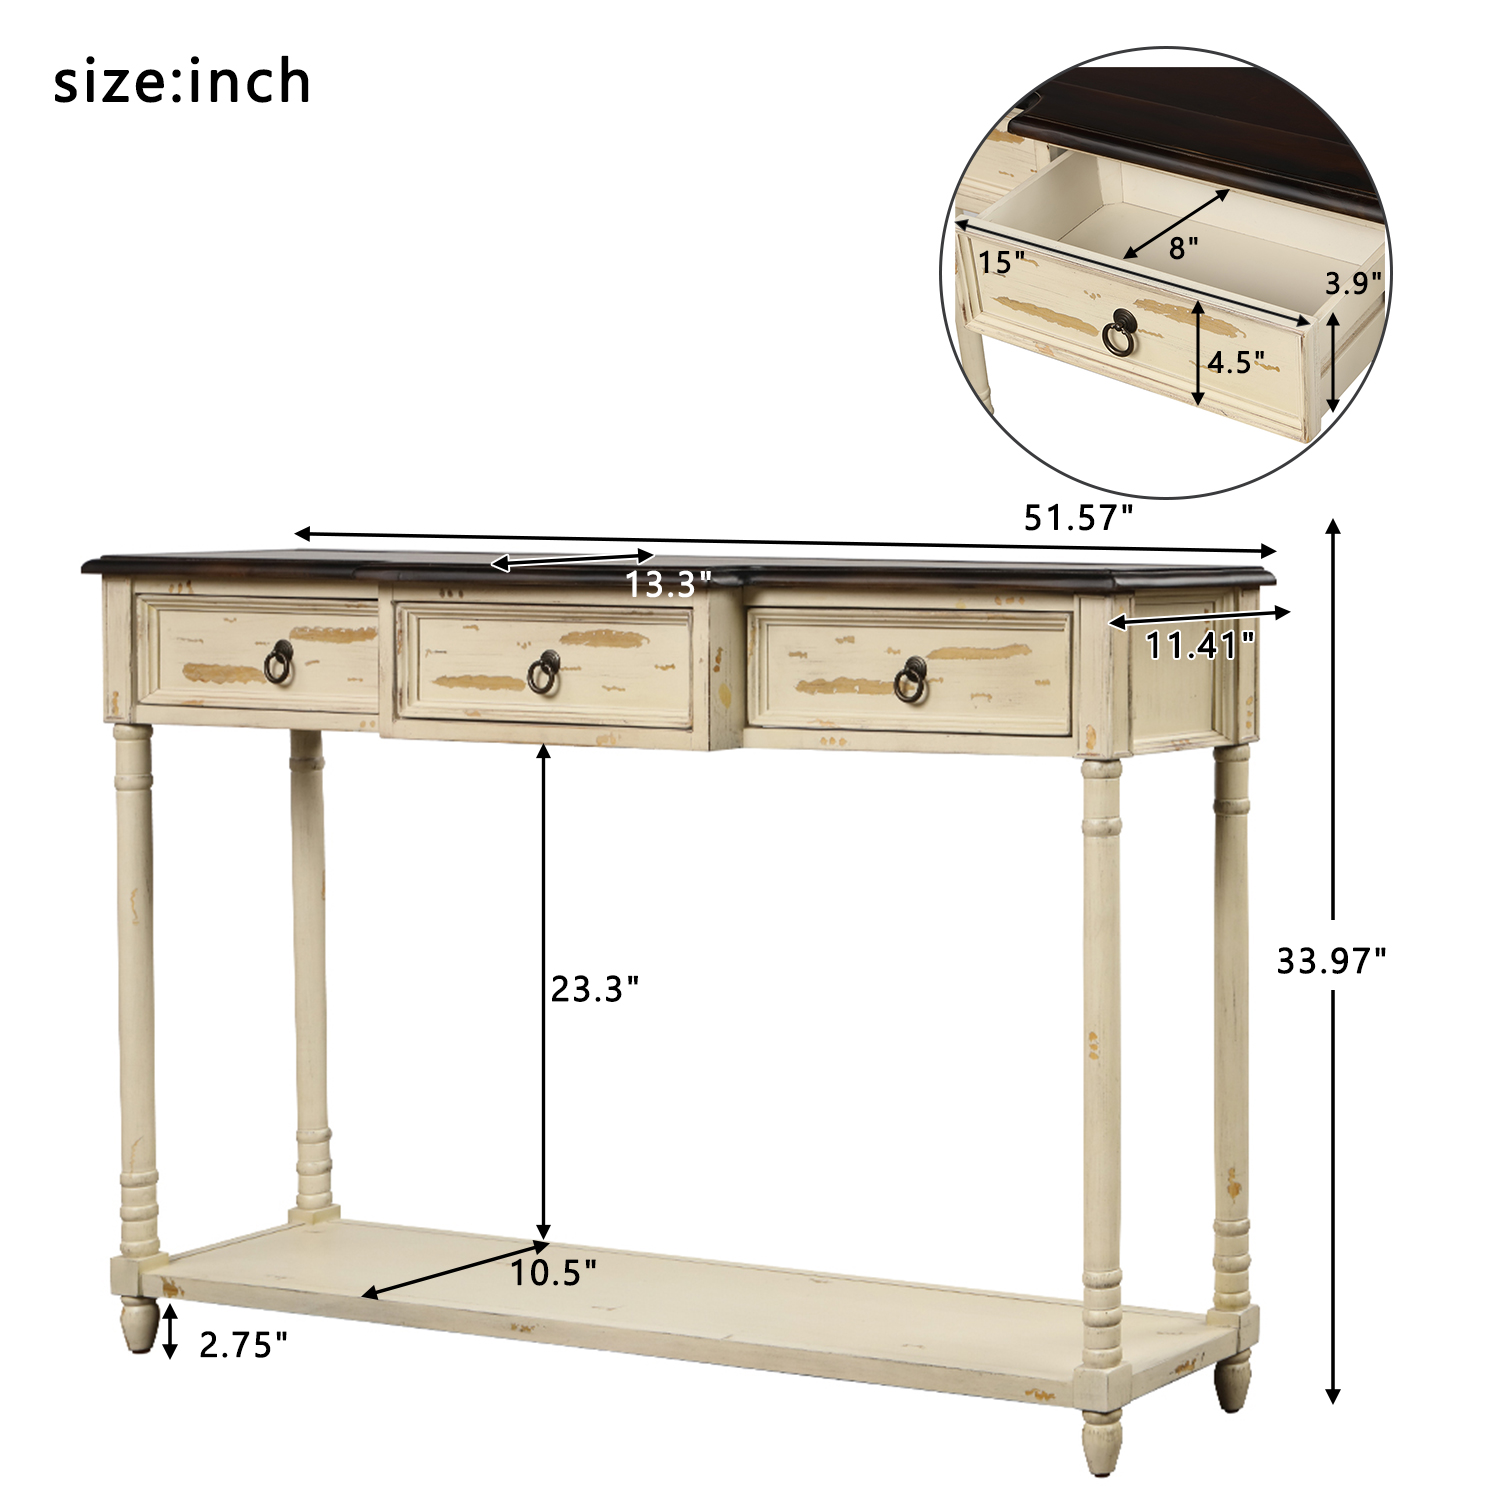 Console Table With Drawers Luxurious And Exquisite Design - WF189574AAD